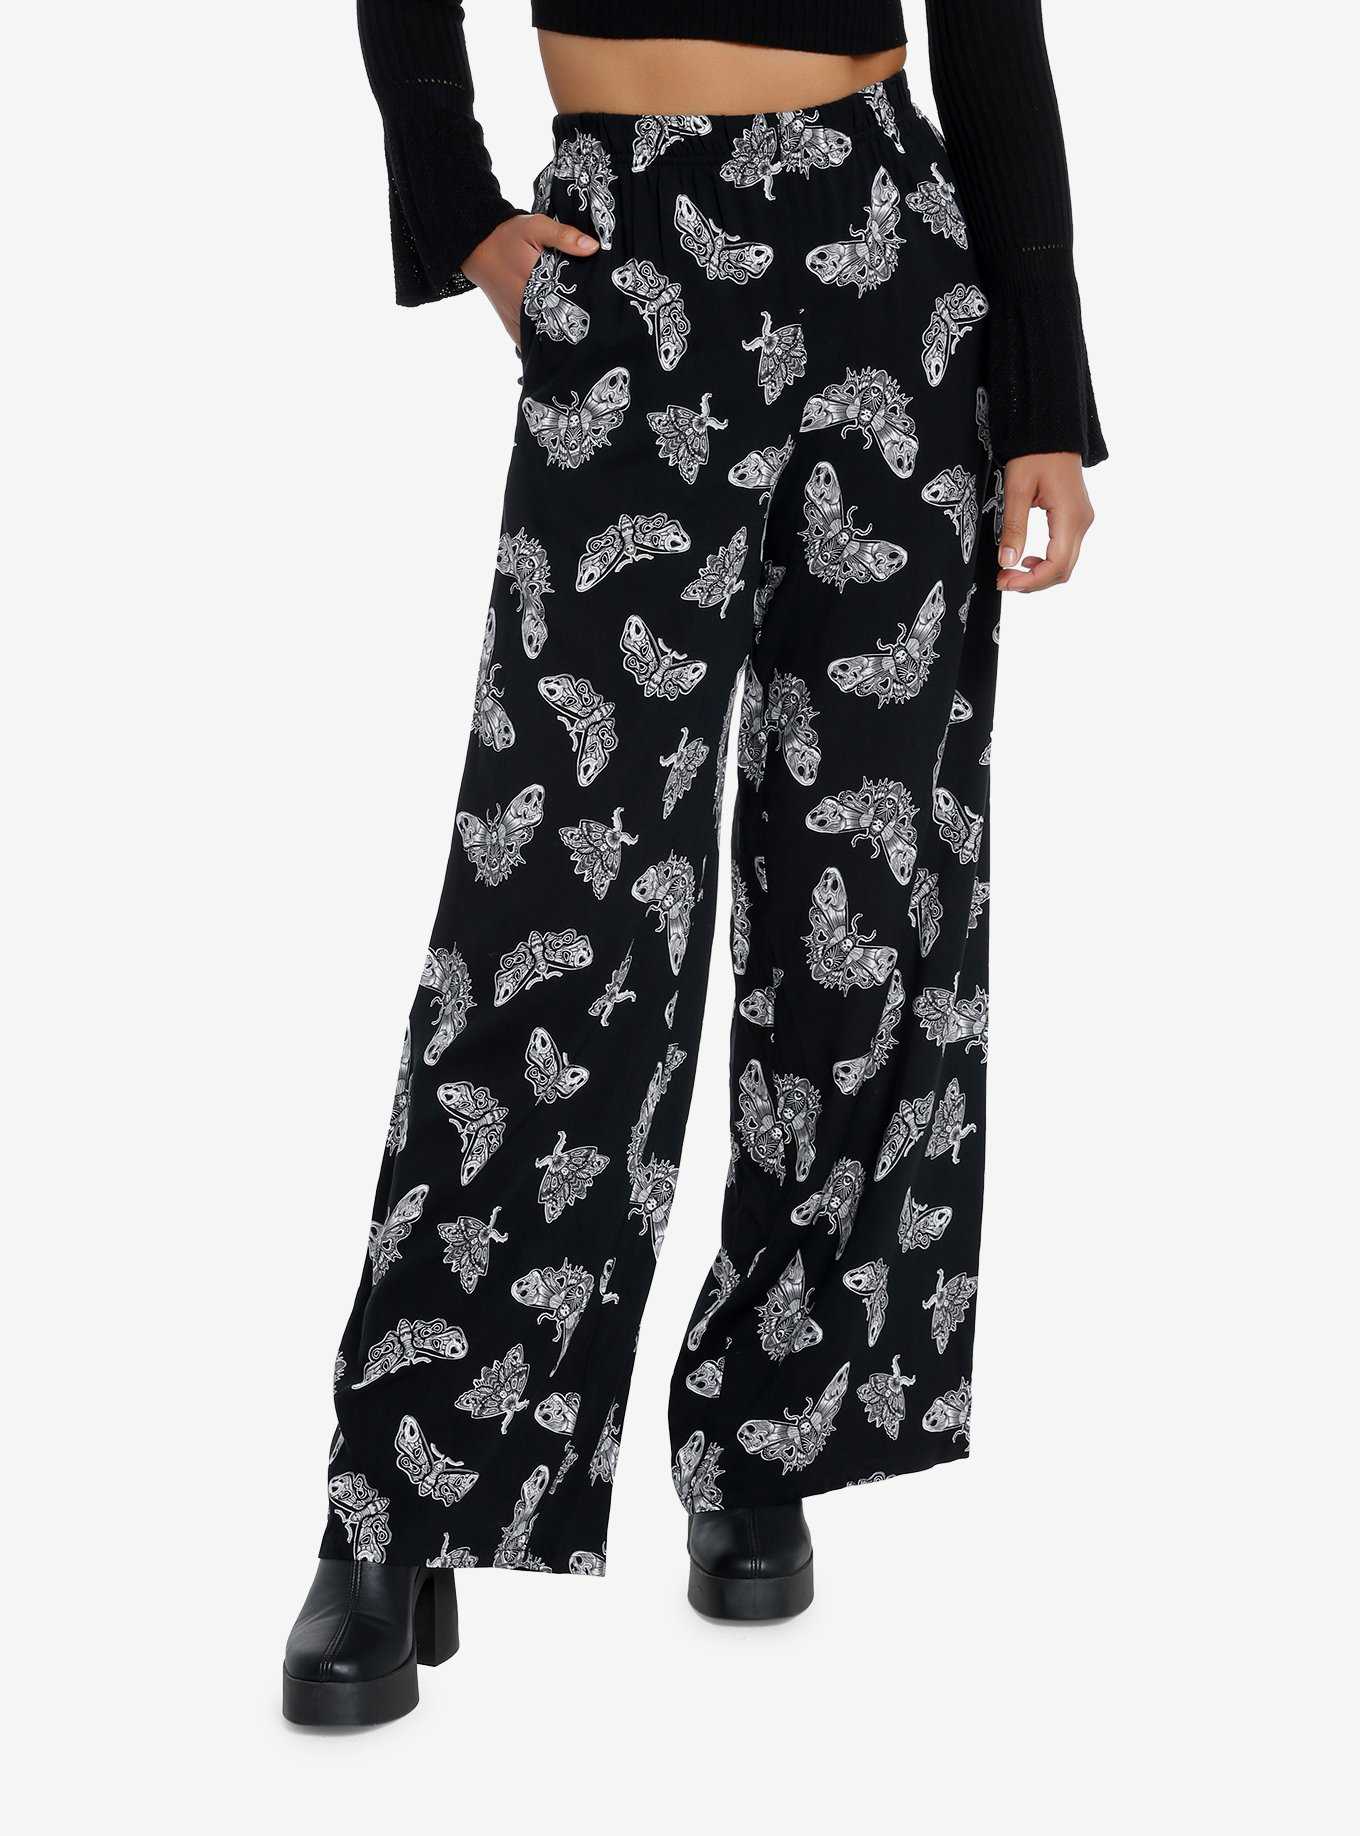 Hot Topic IT Pennywise Side Chain Wide Leg Pants With Belt Size 11